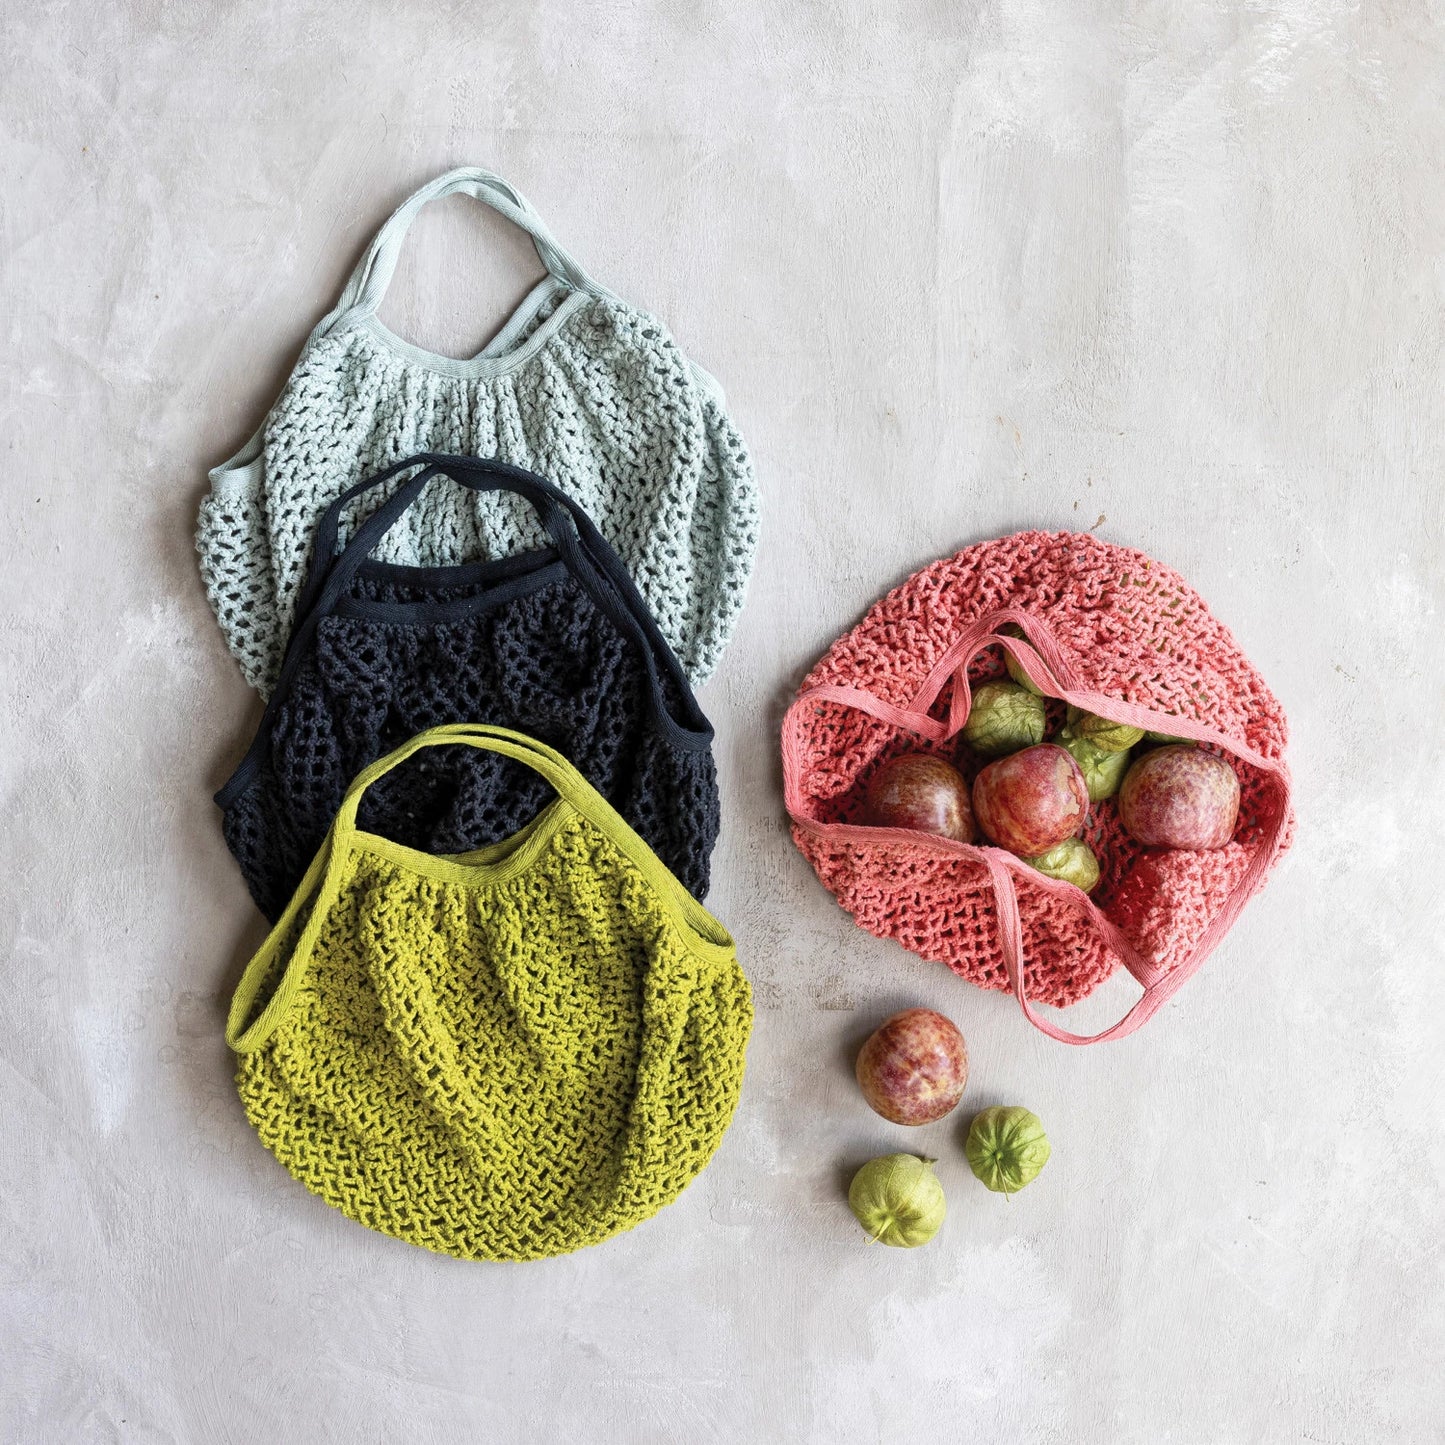 Cotton Crocheted Market Bags